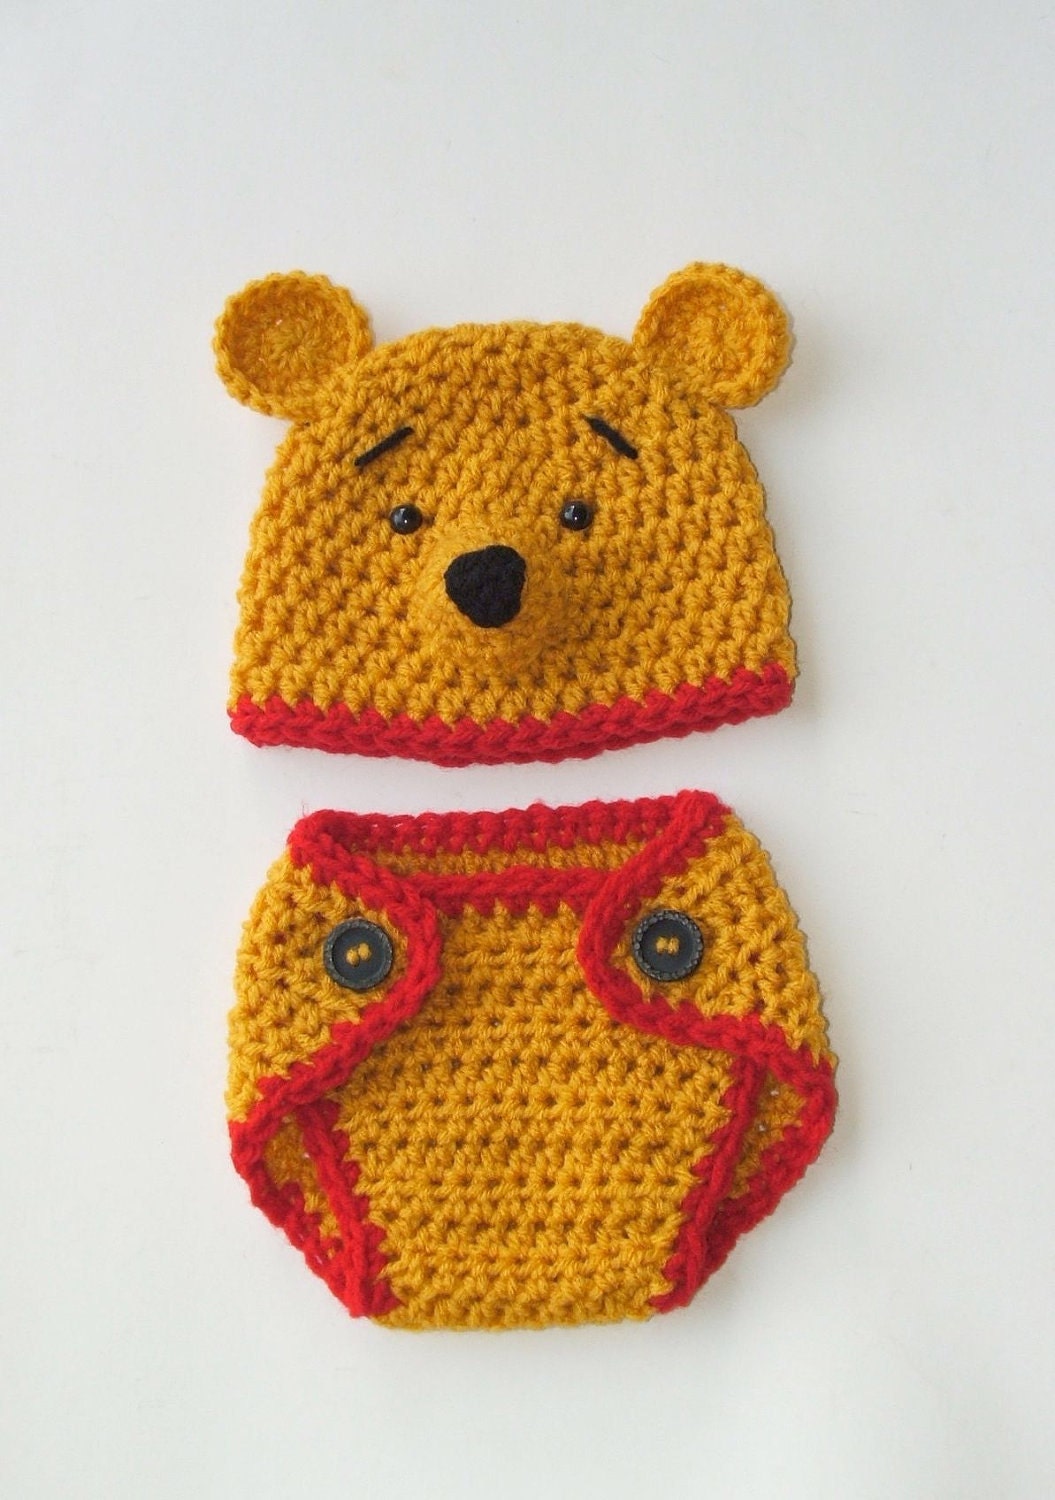 Piglet Hat & Diaper Cover Set, inspired by Winnie the Pooh (newborn-3 month size)